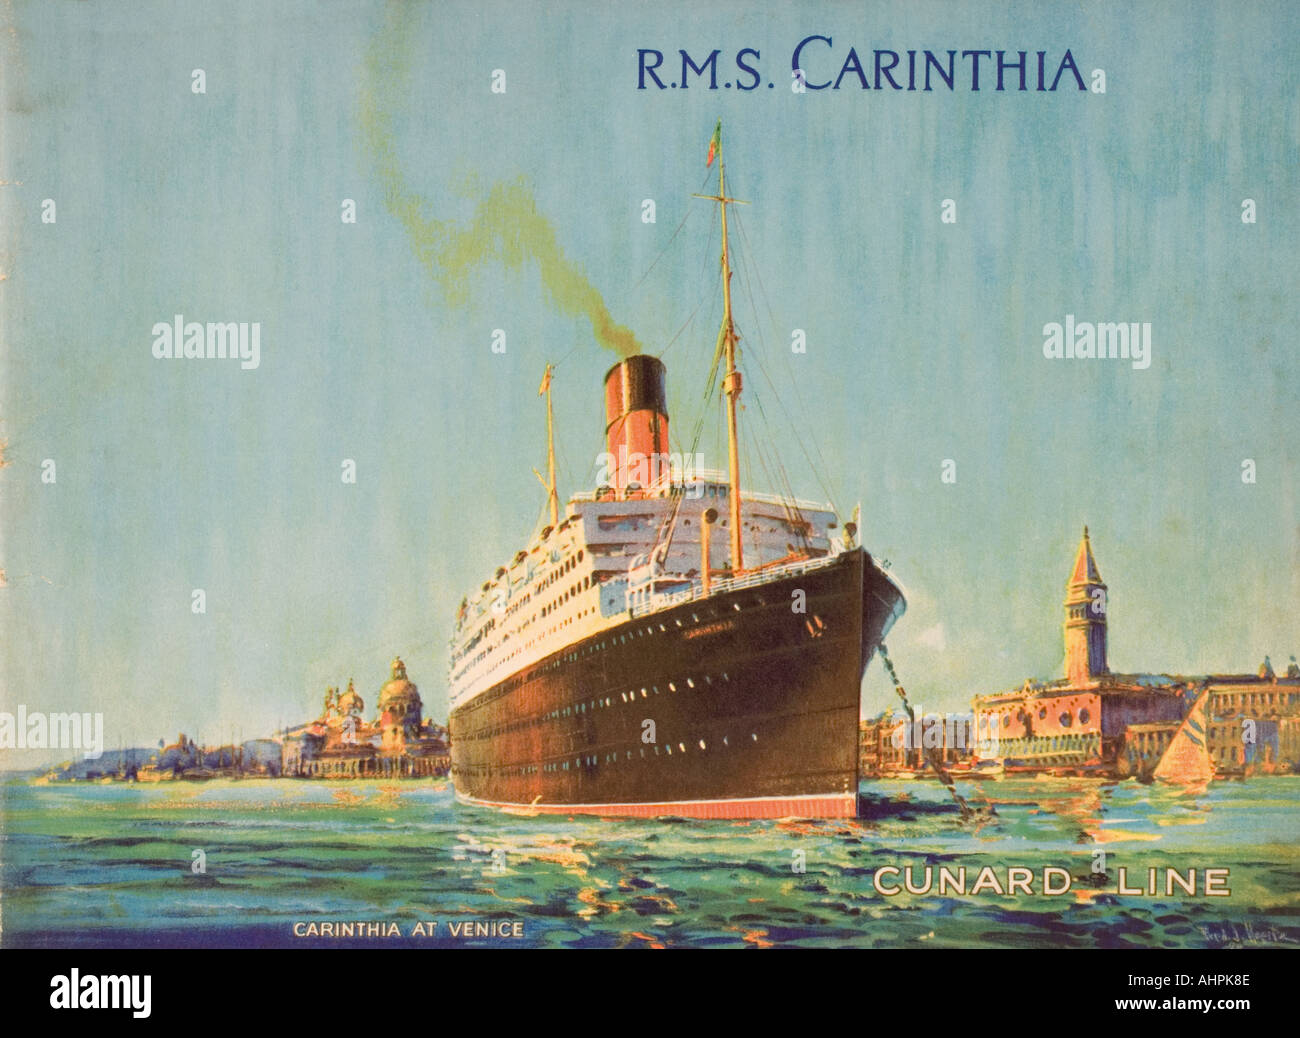 Cunard Line promotional brochure for the RMS Carinthia circa 1926 - 1930. Stock Photo